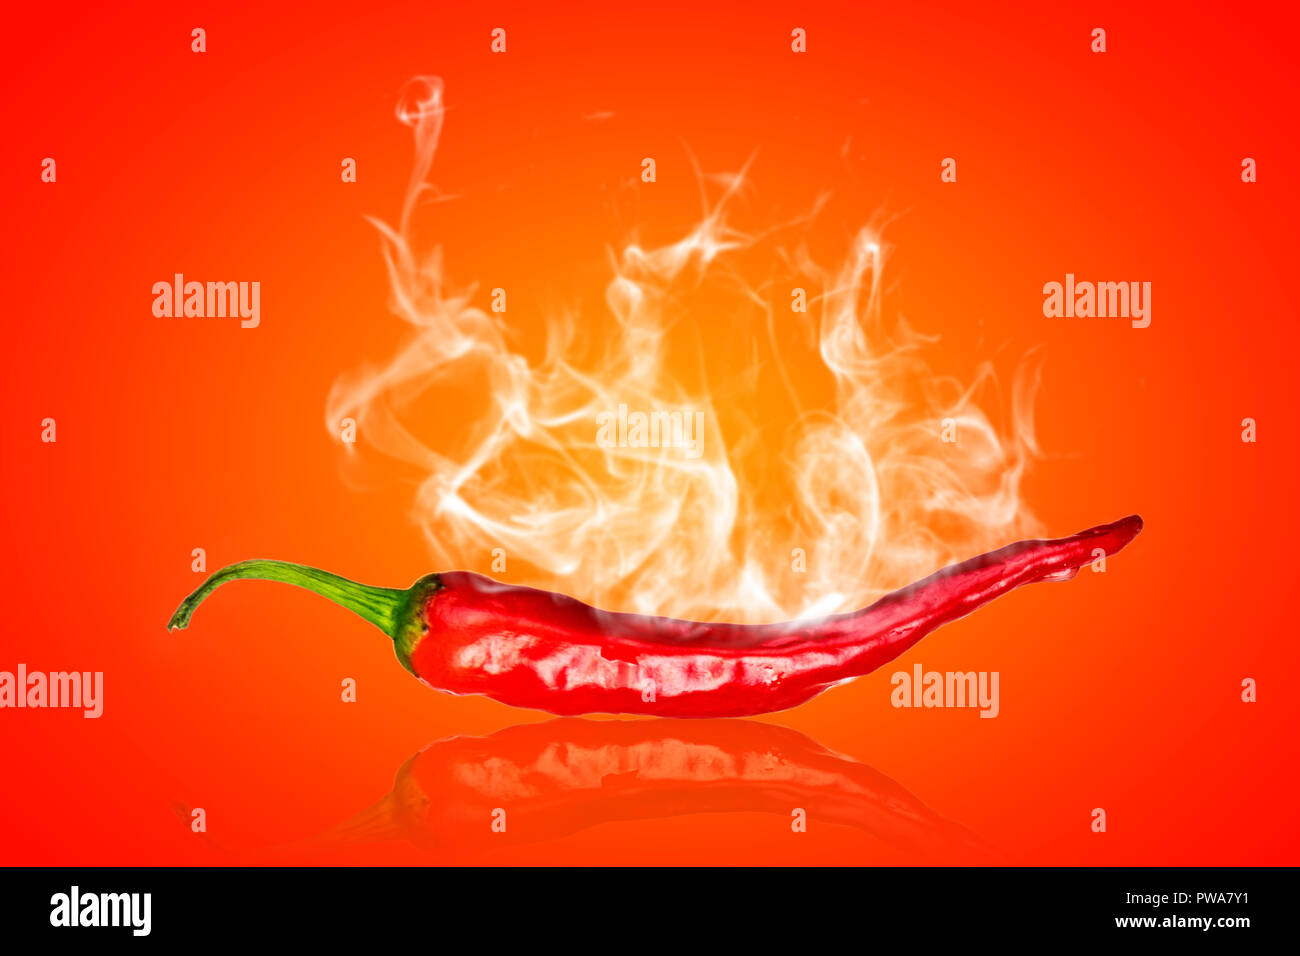 single red chili peppers  with white smoke on red background Stock Photo